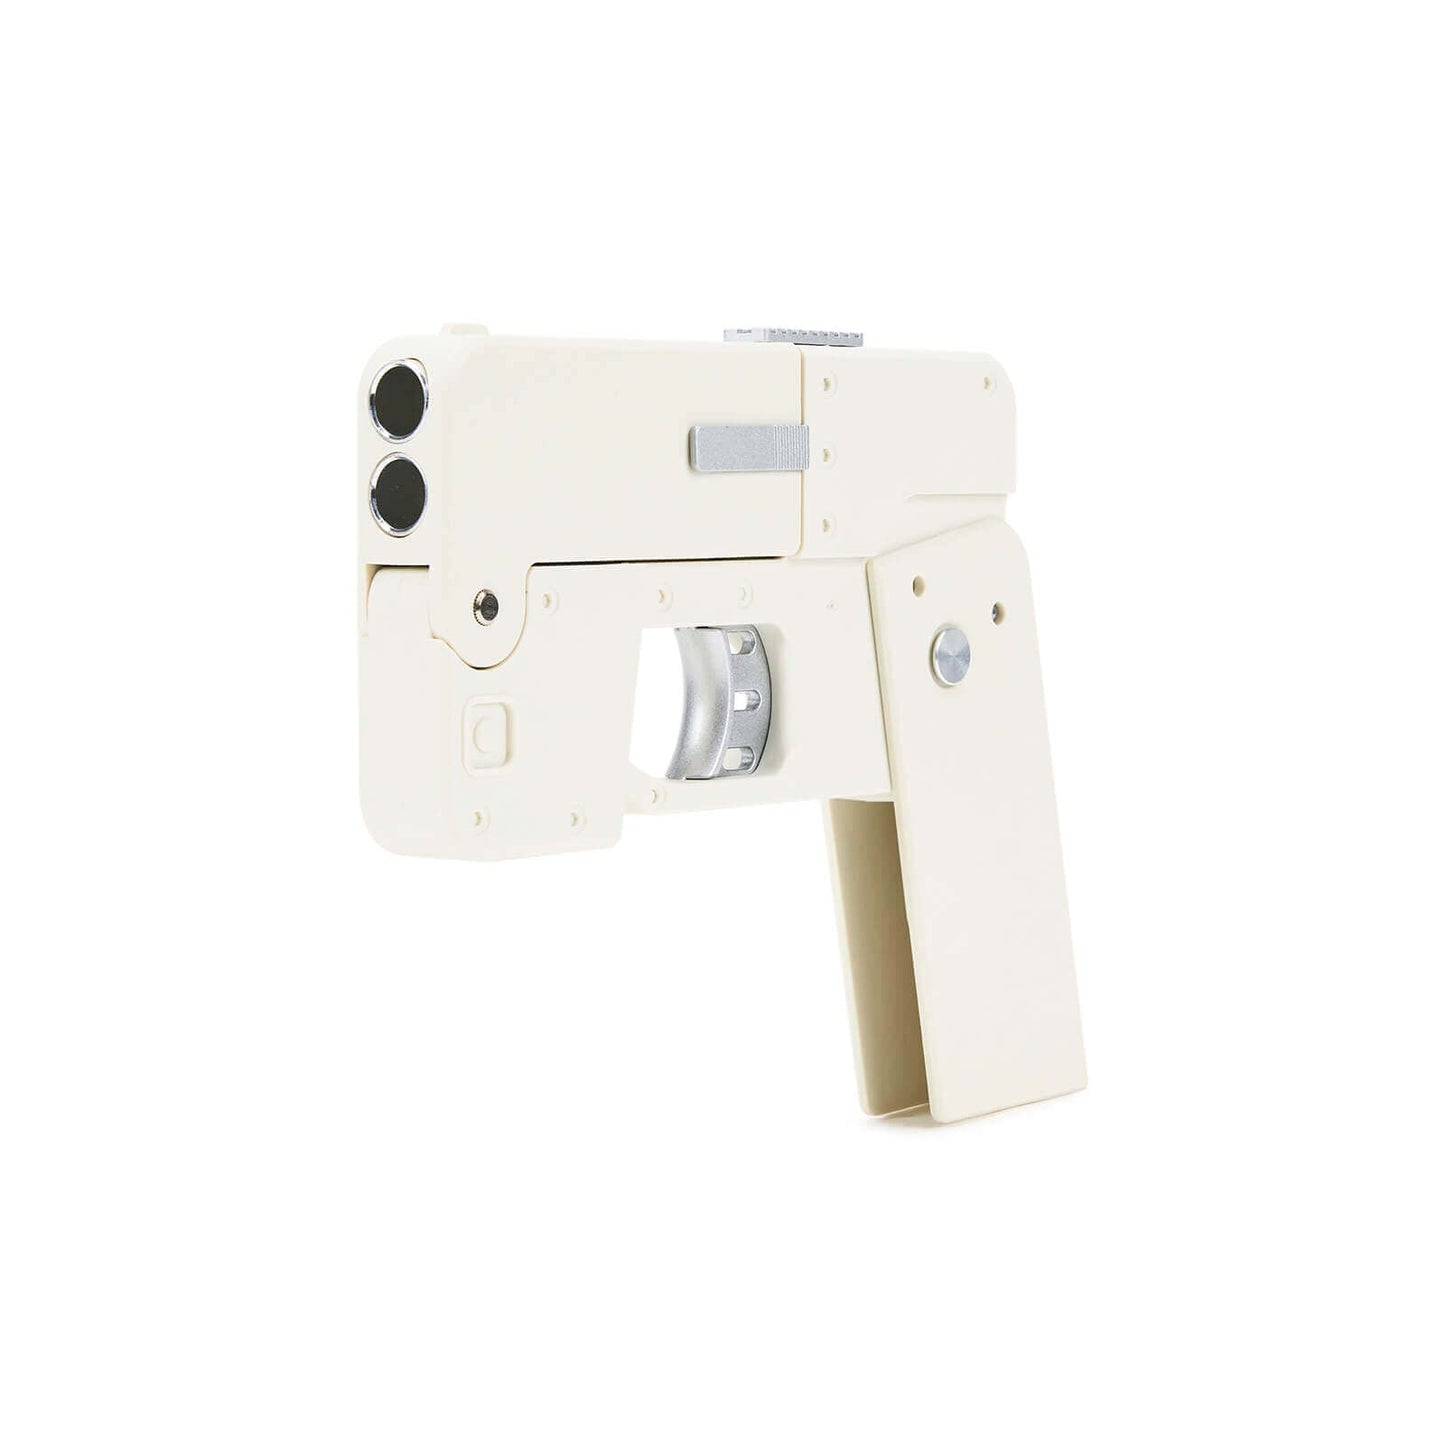 IC380 Cellphone Pistol Toy Safe toys for 18+